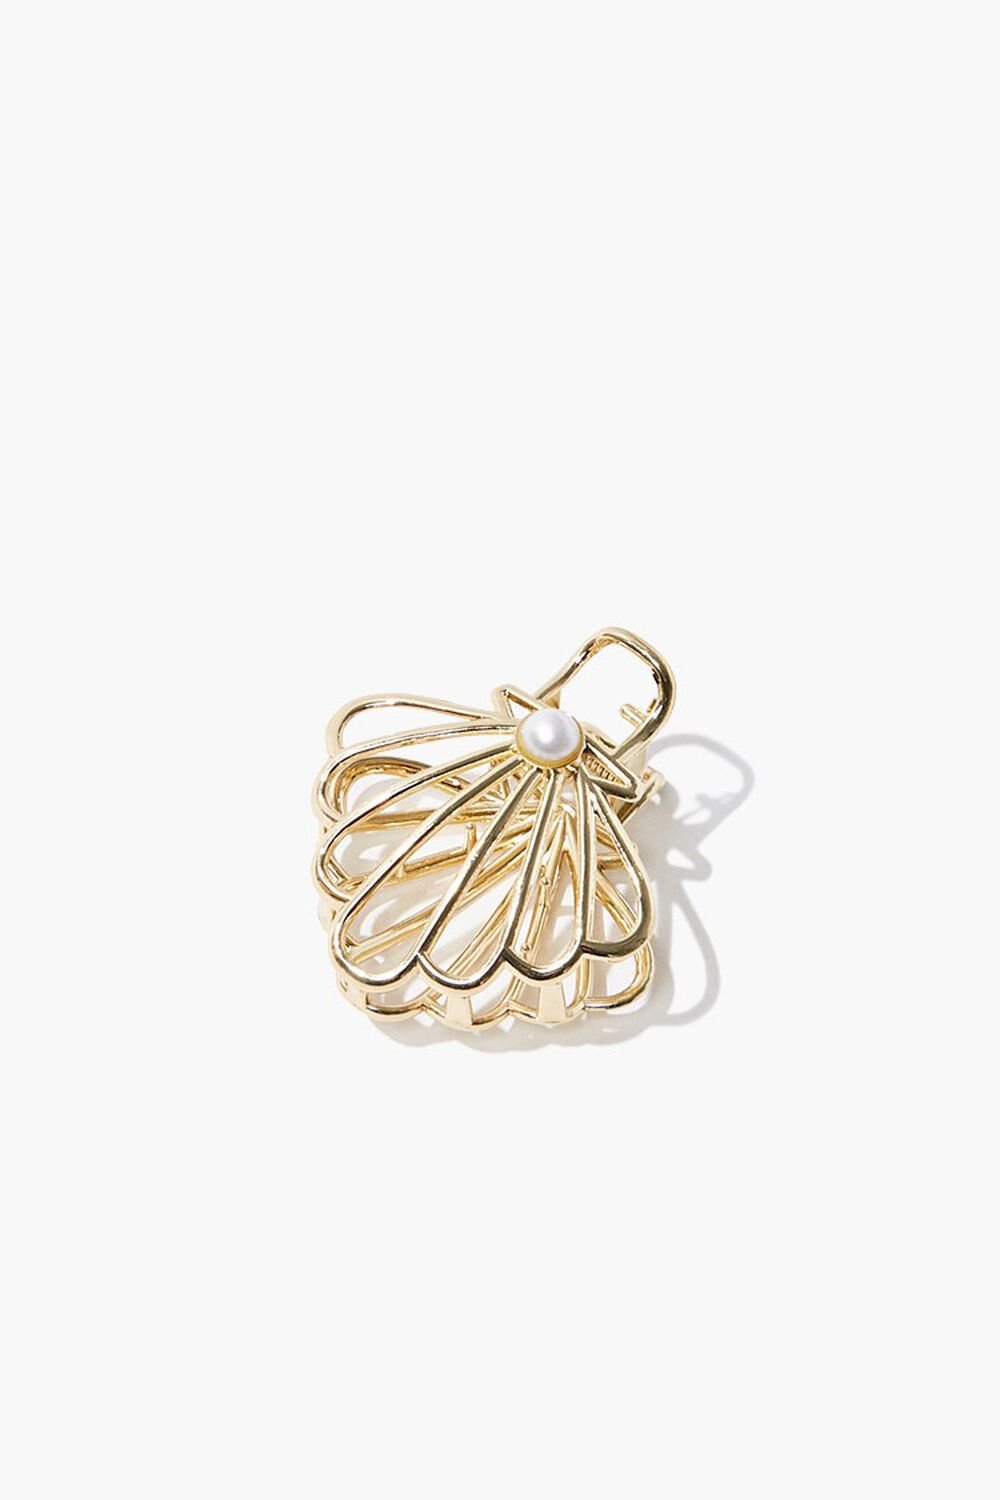 GOLD Seashell Claw Clip, image 1